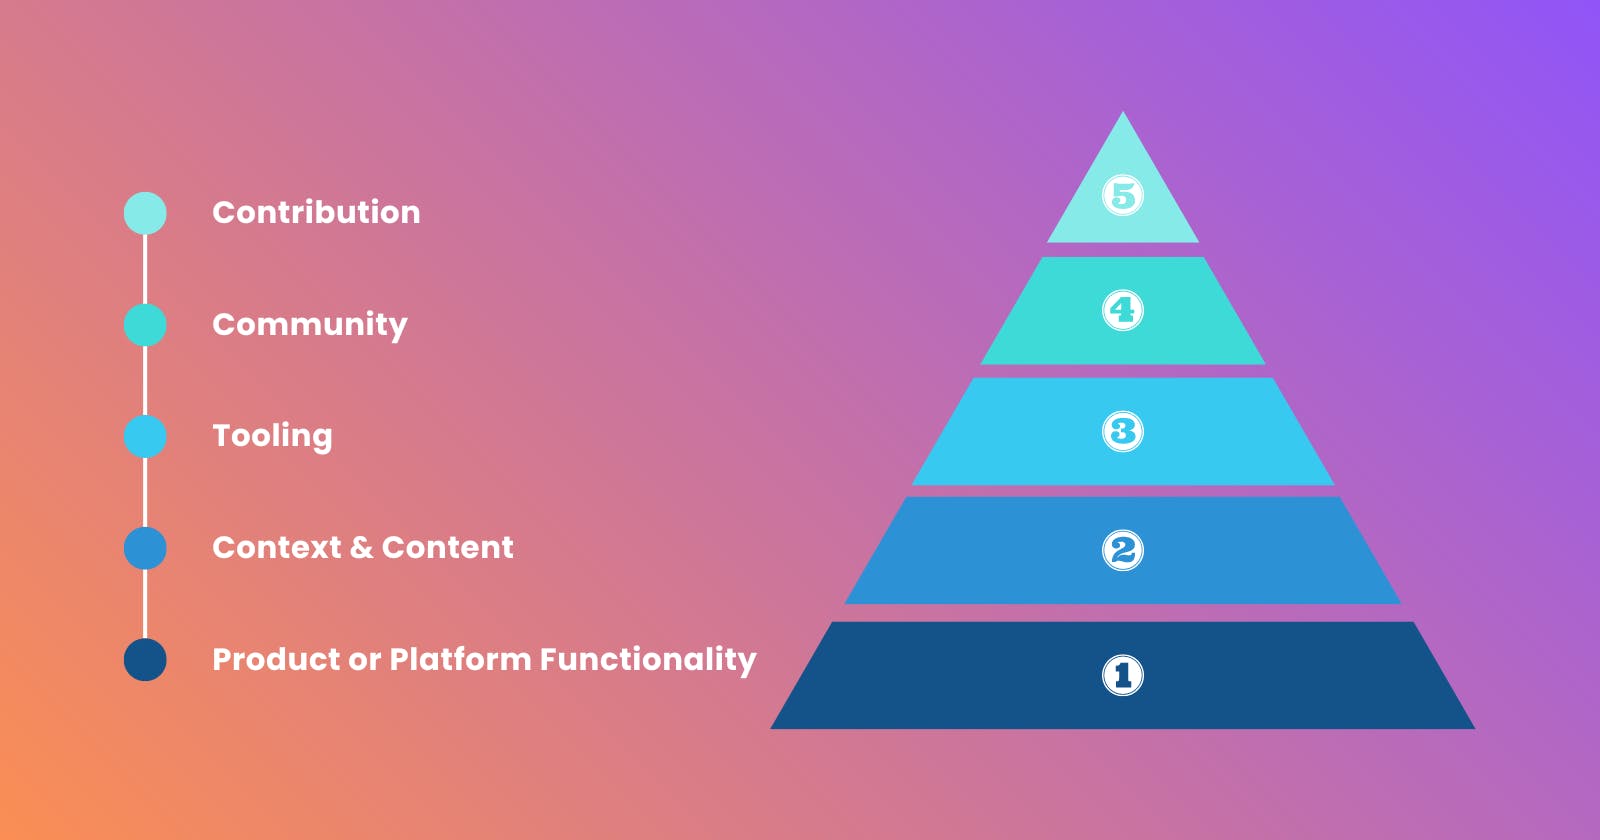 The Developer's Hierarchy of Needs